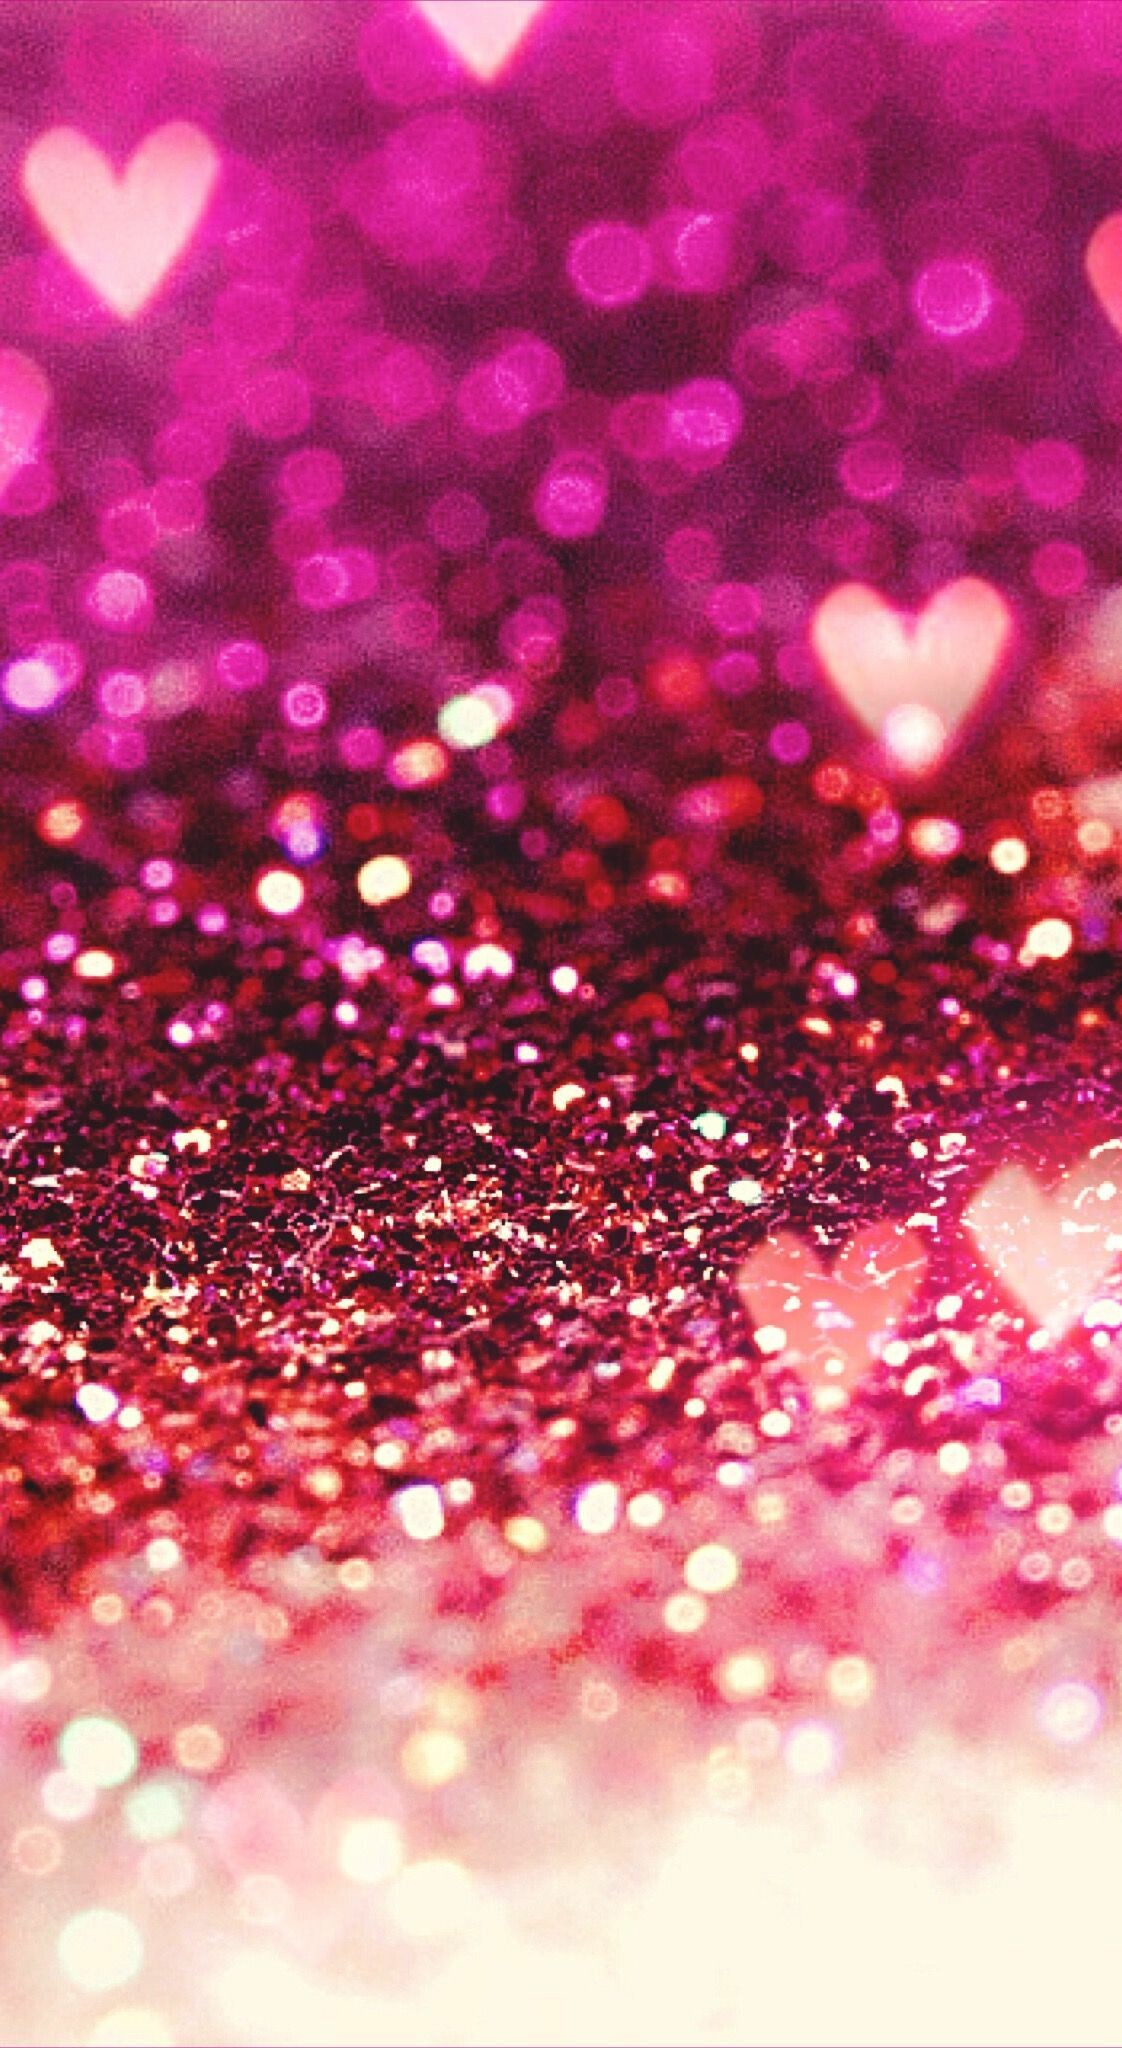 Sparkle: Glittery, Decoration of a special occasion, like a birthday or anniversary. 1130x2050 HD Background.